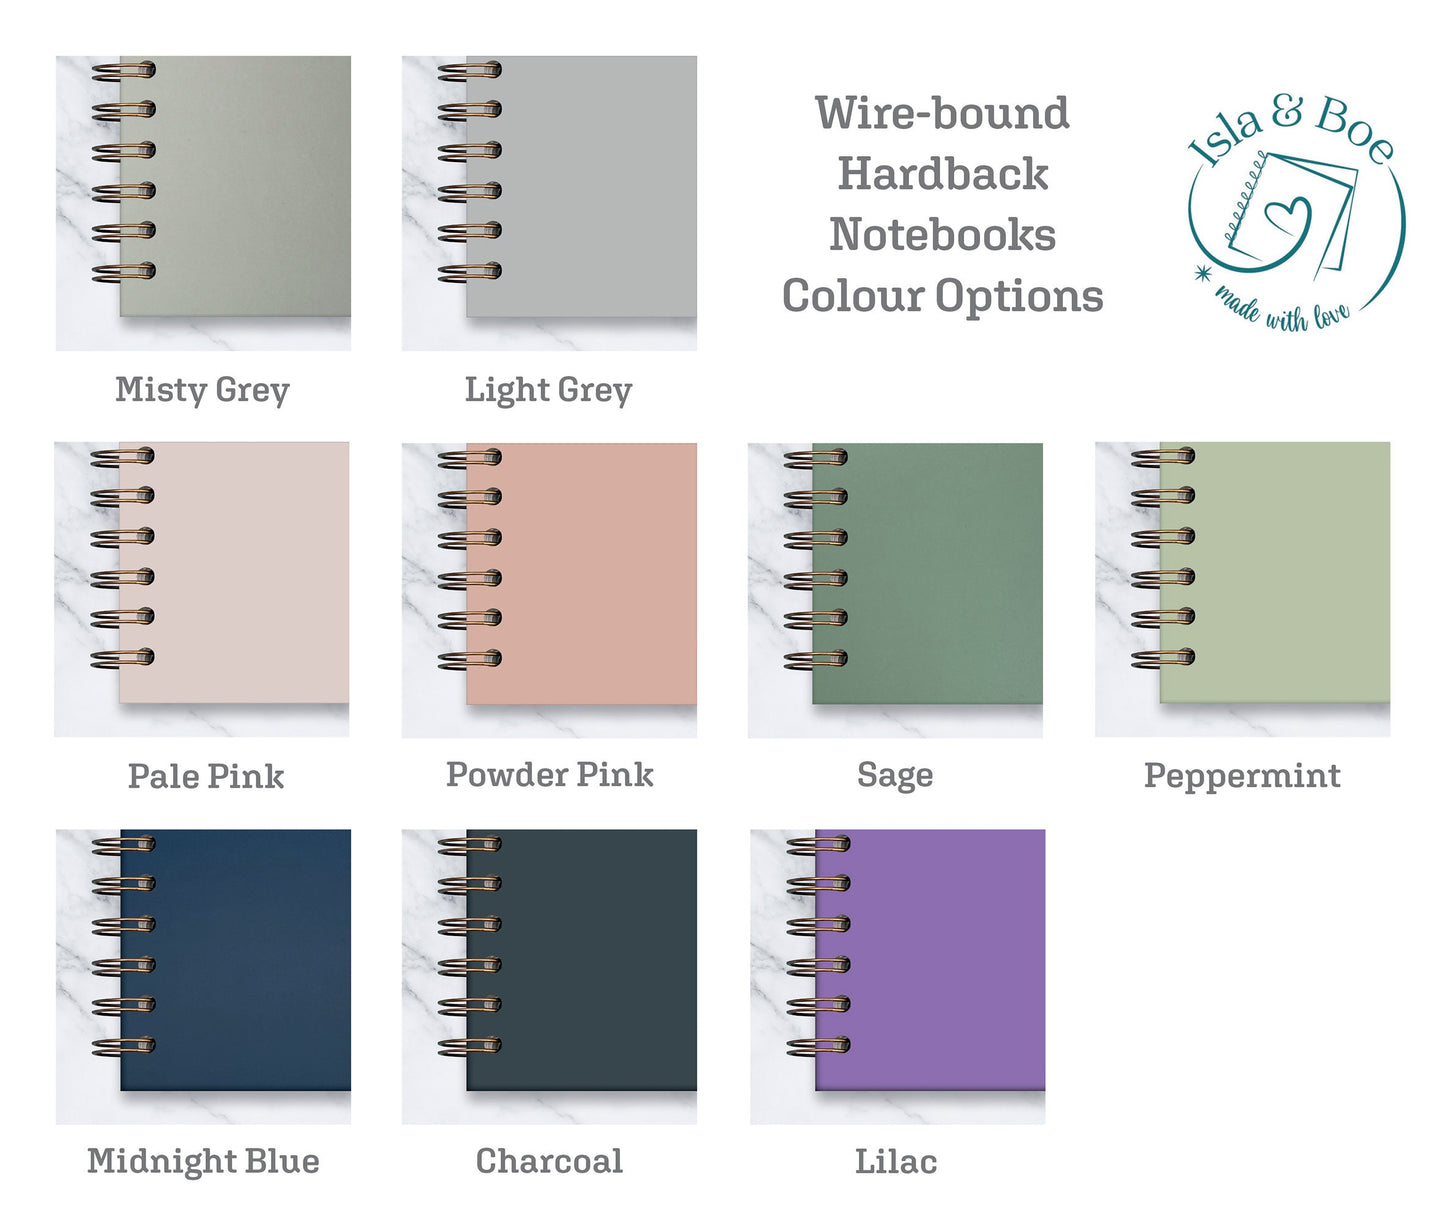 Colour swatch for the hardback notebook options. Misty Grey, Light Grey, Pale Pink, Powder Pink, Sage, Peppermint, Midnight Blue, Charcoal and Lilac